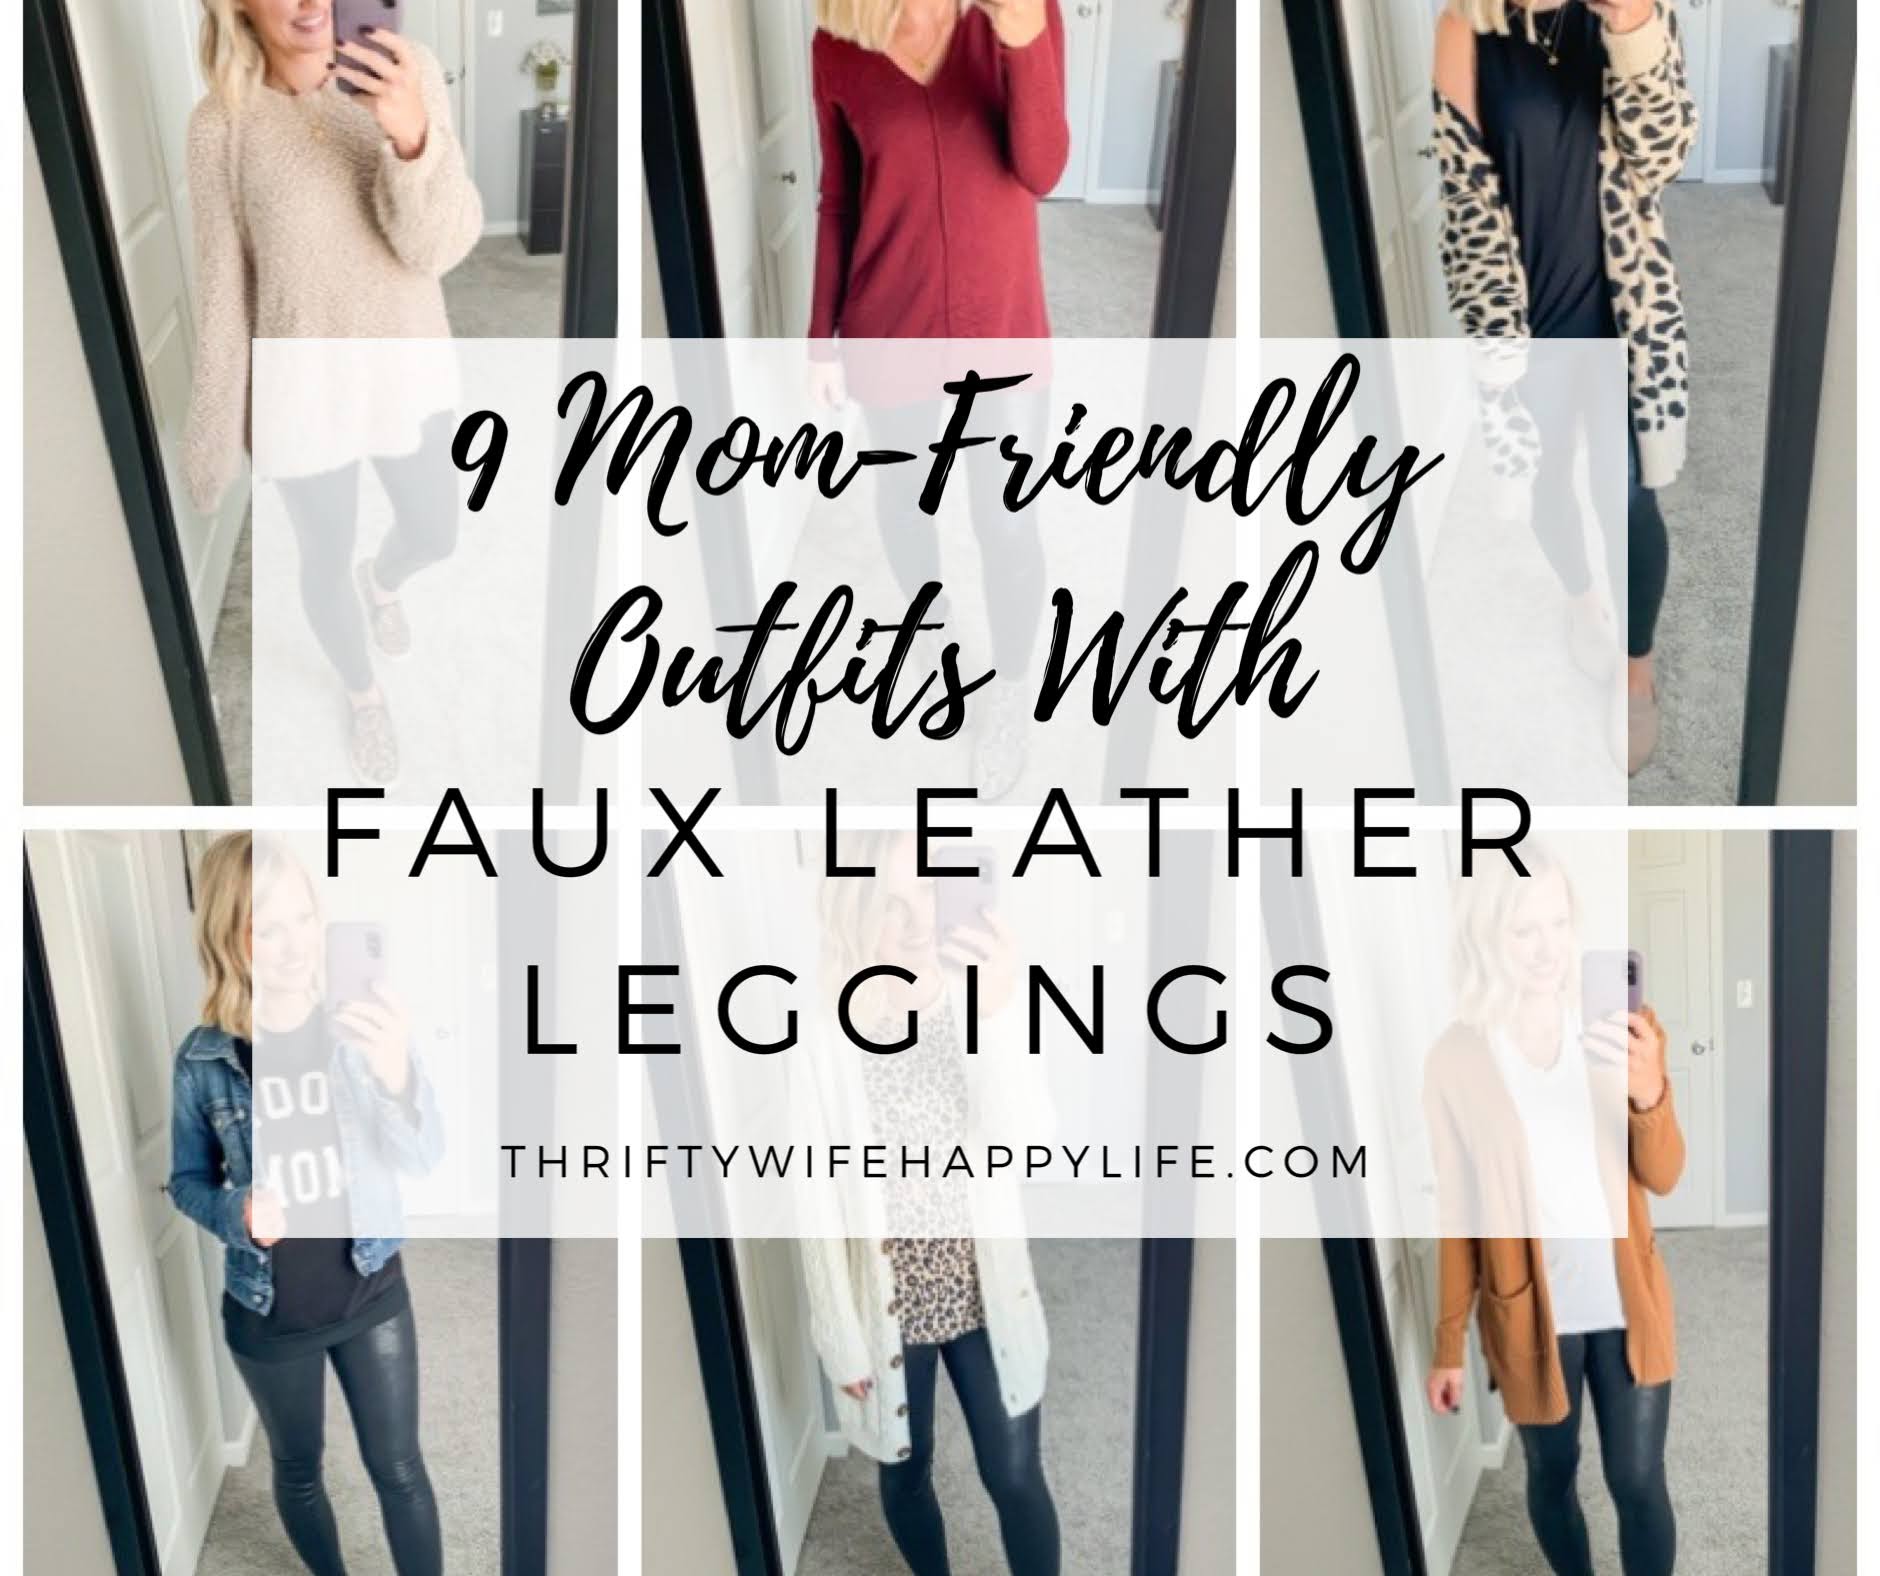 9 Mom-Friendly Outfits With Faux Leather Leggings - Thrifty Wife Happy Life